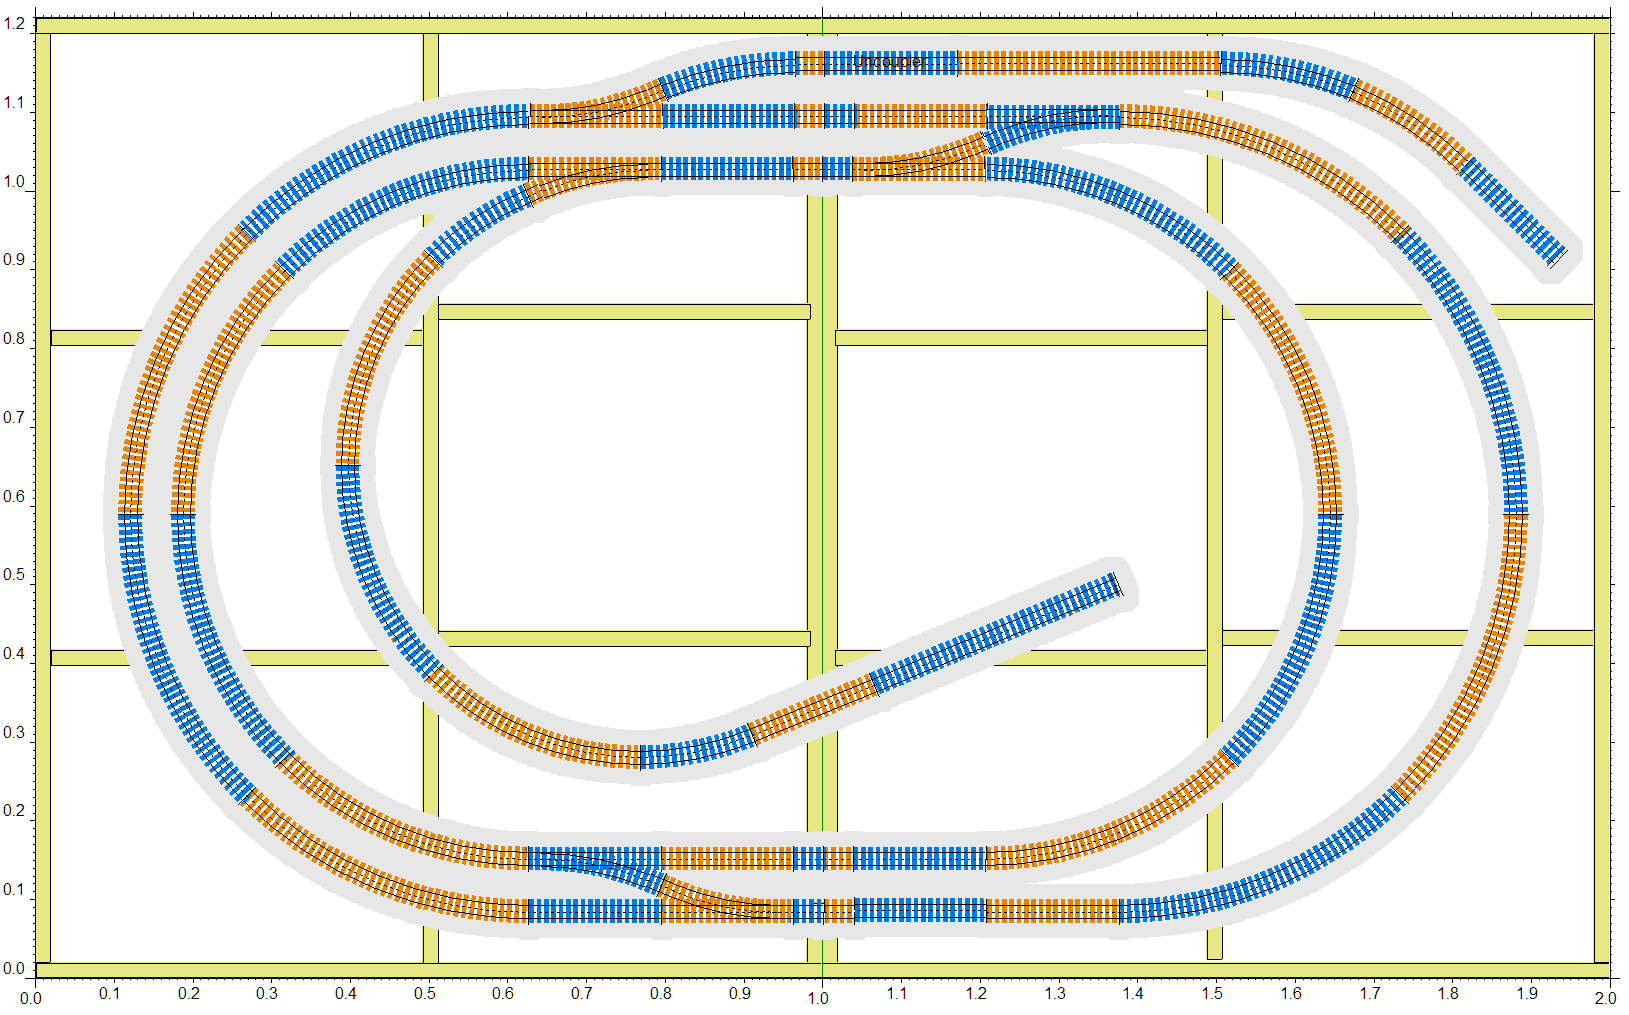 Track plan - see text